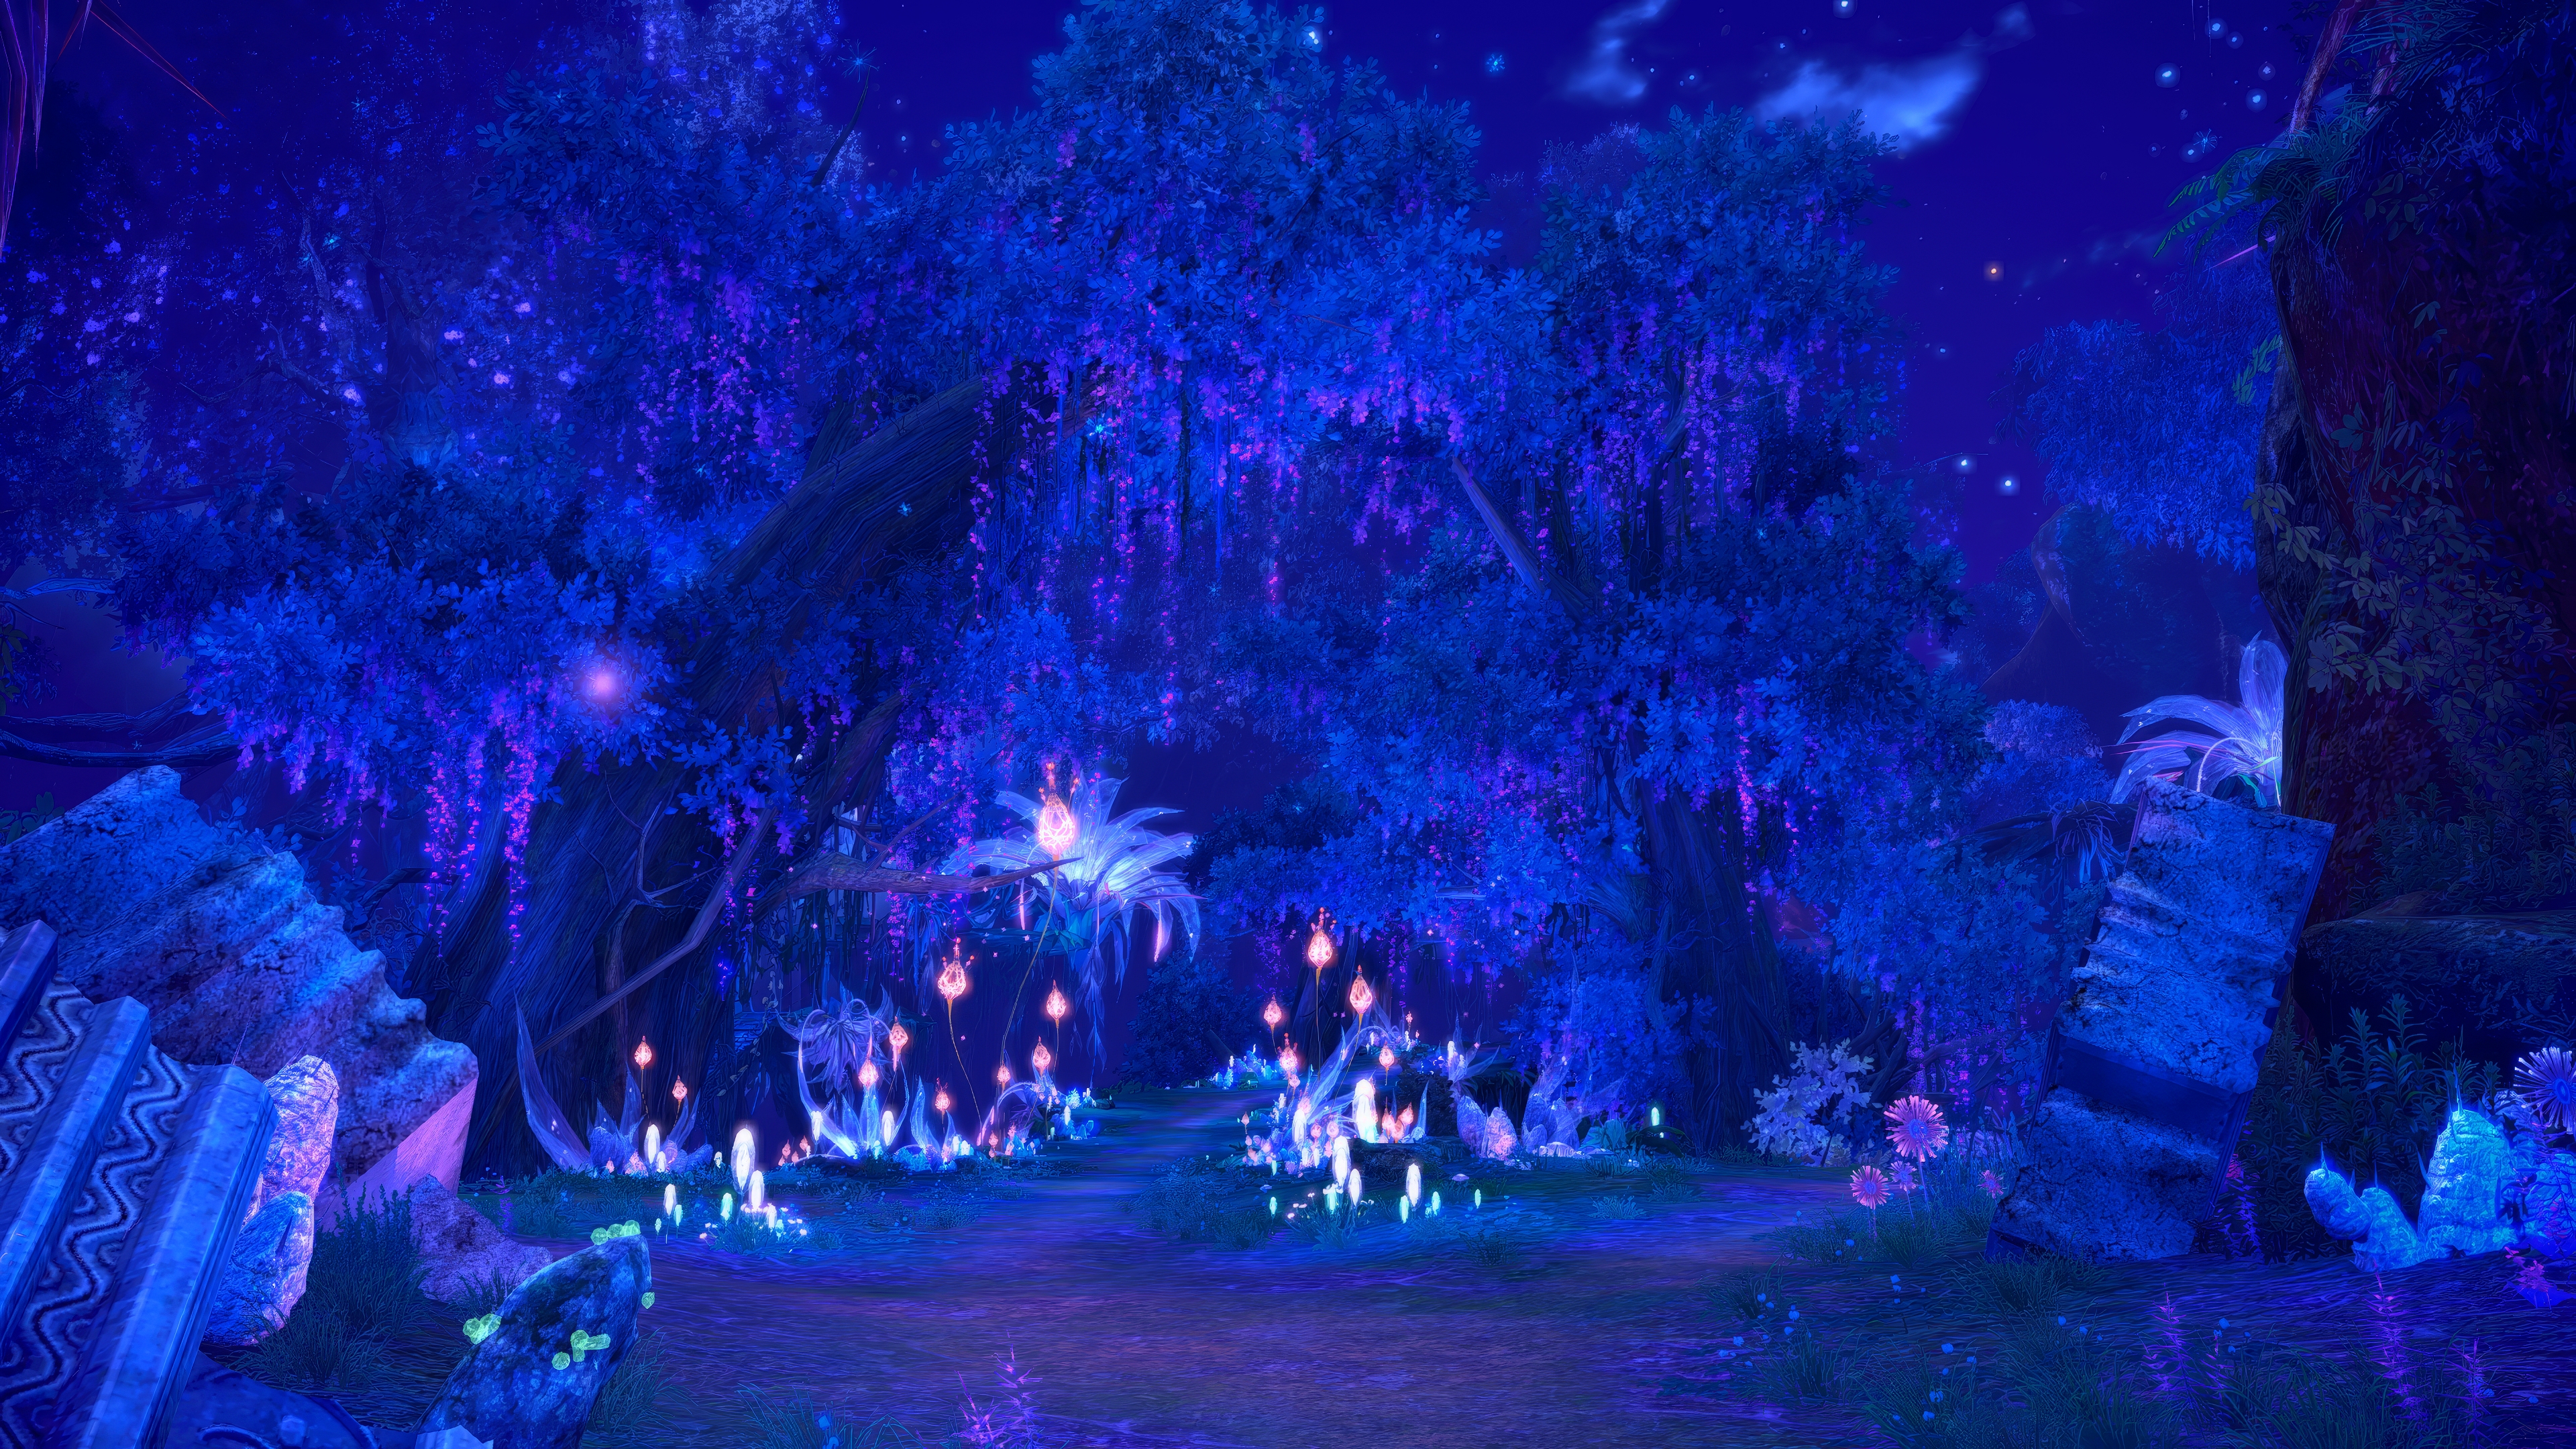 Video Game Art Night Glowing Neon Blue Shiny Plants Trees Forest Clearing Forest Digital Art 3840x2160